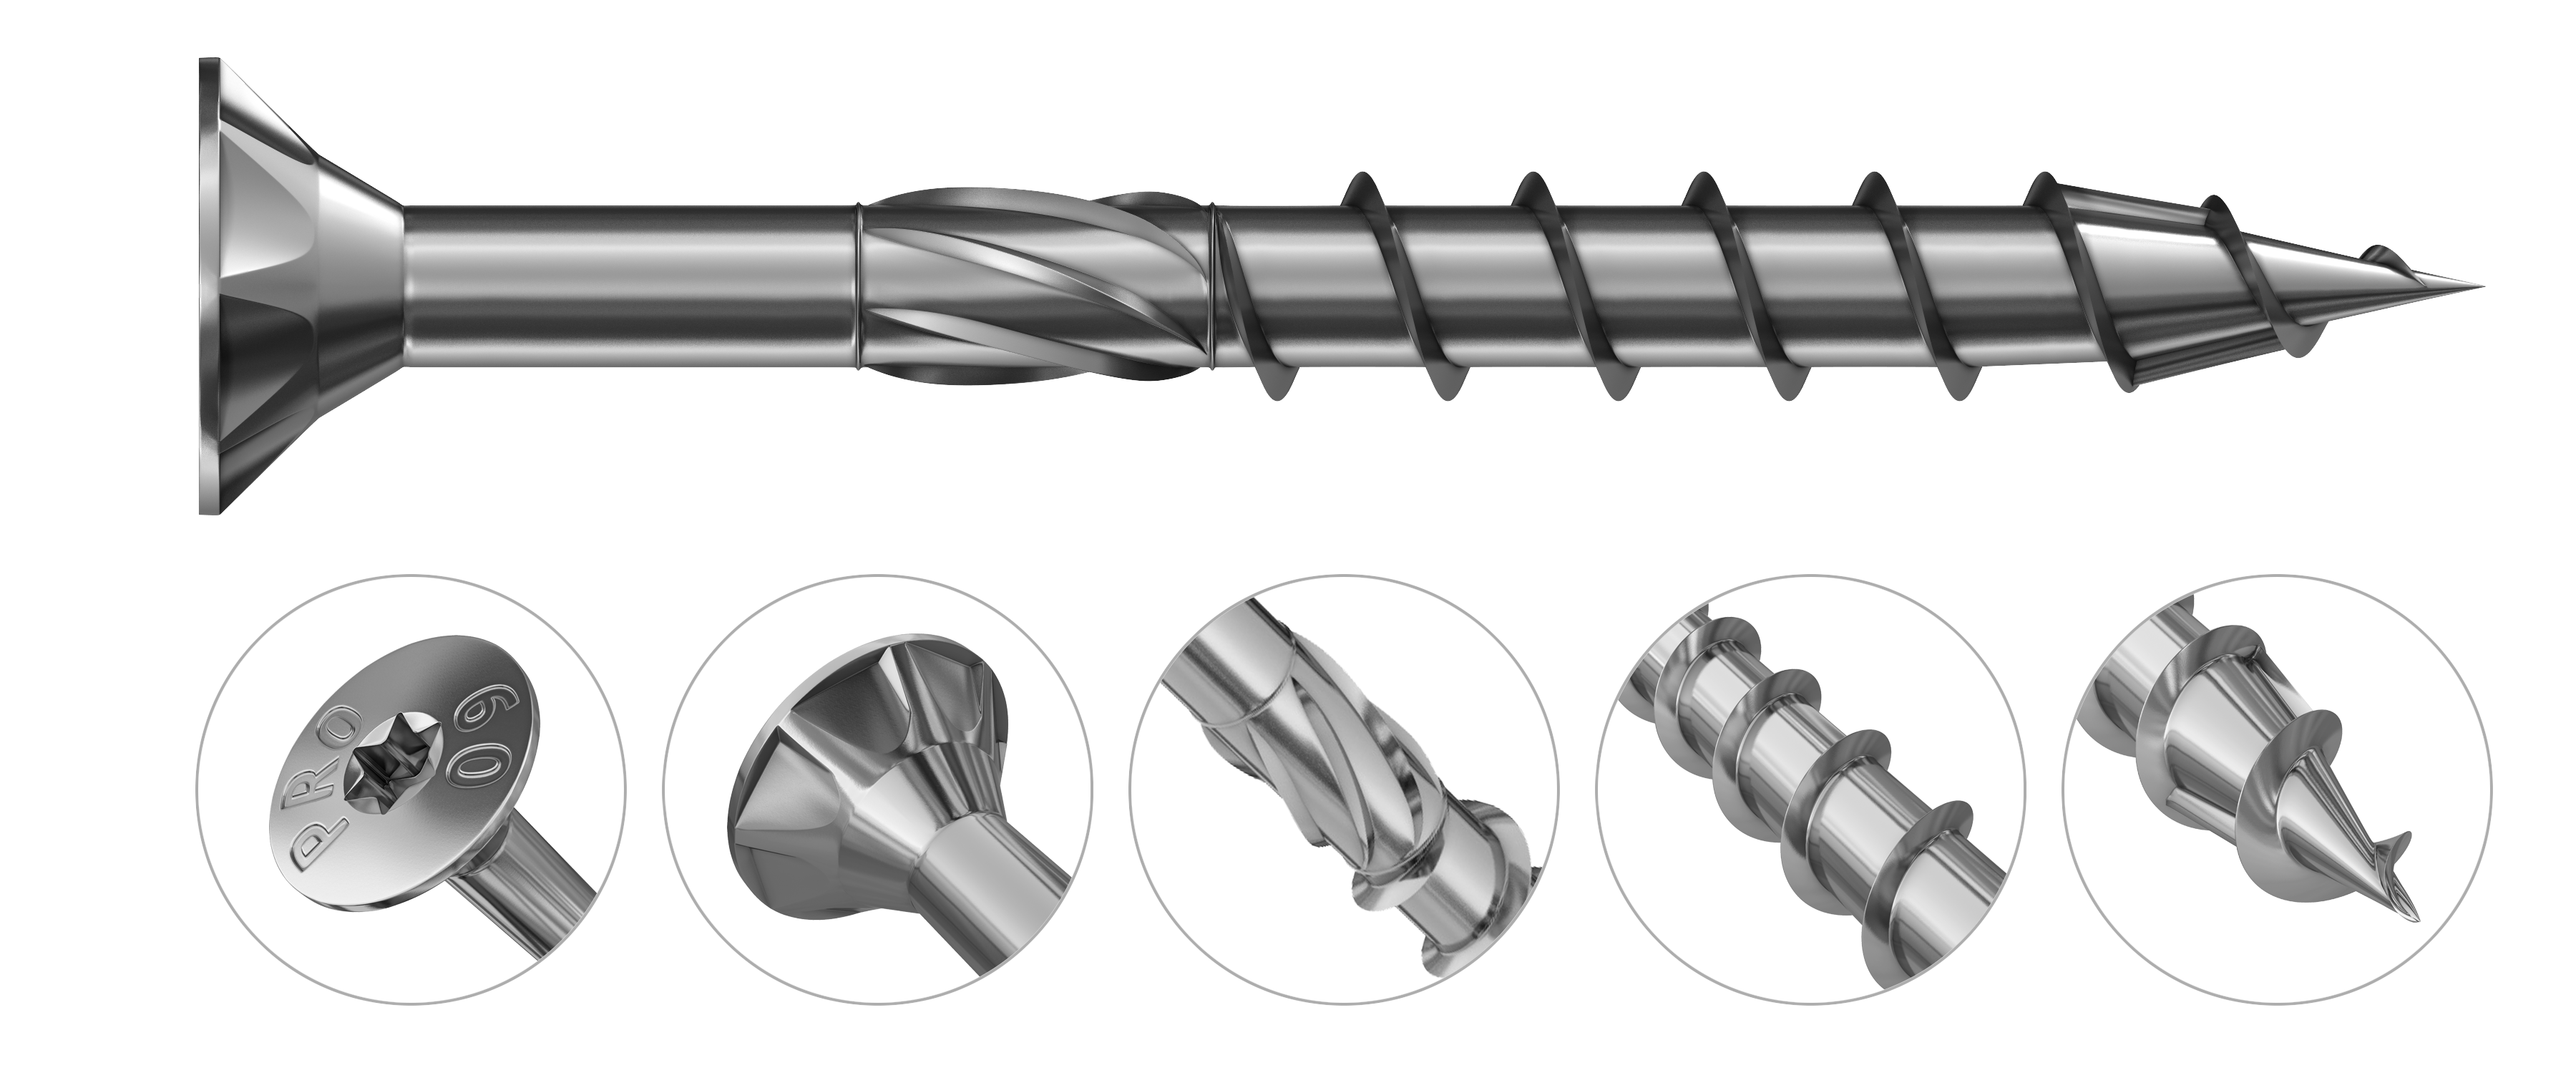 R-PTX Construction screw with countersunk head and partial thread